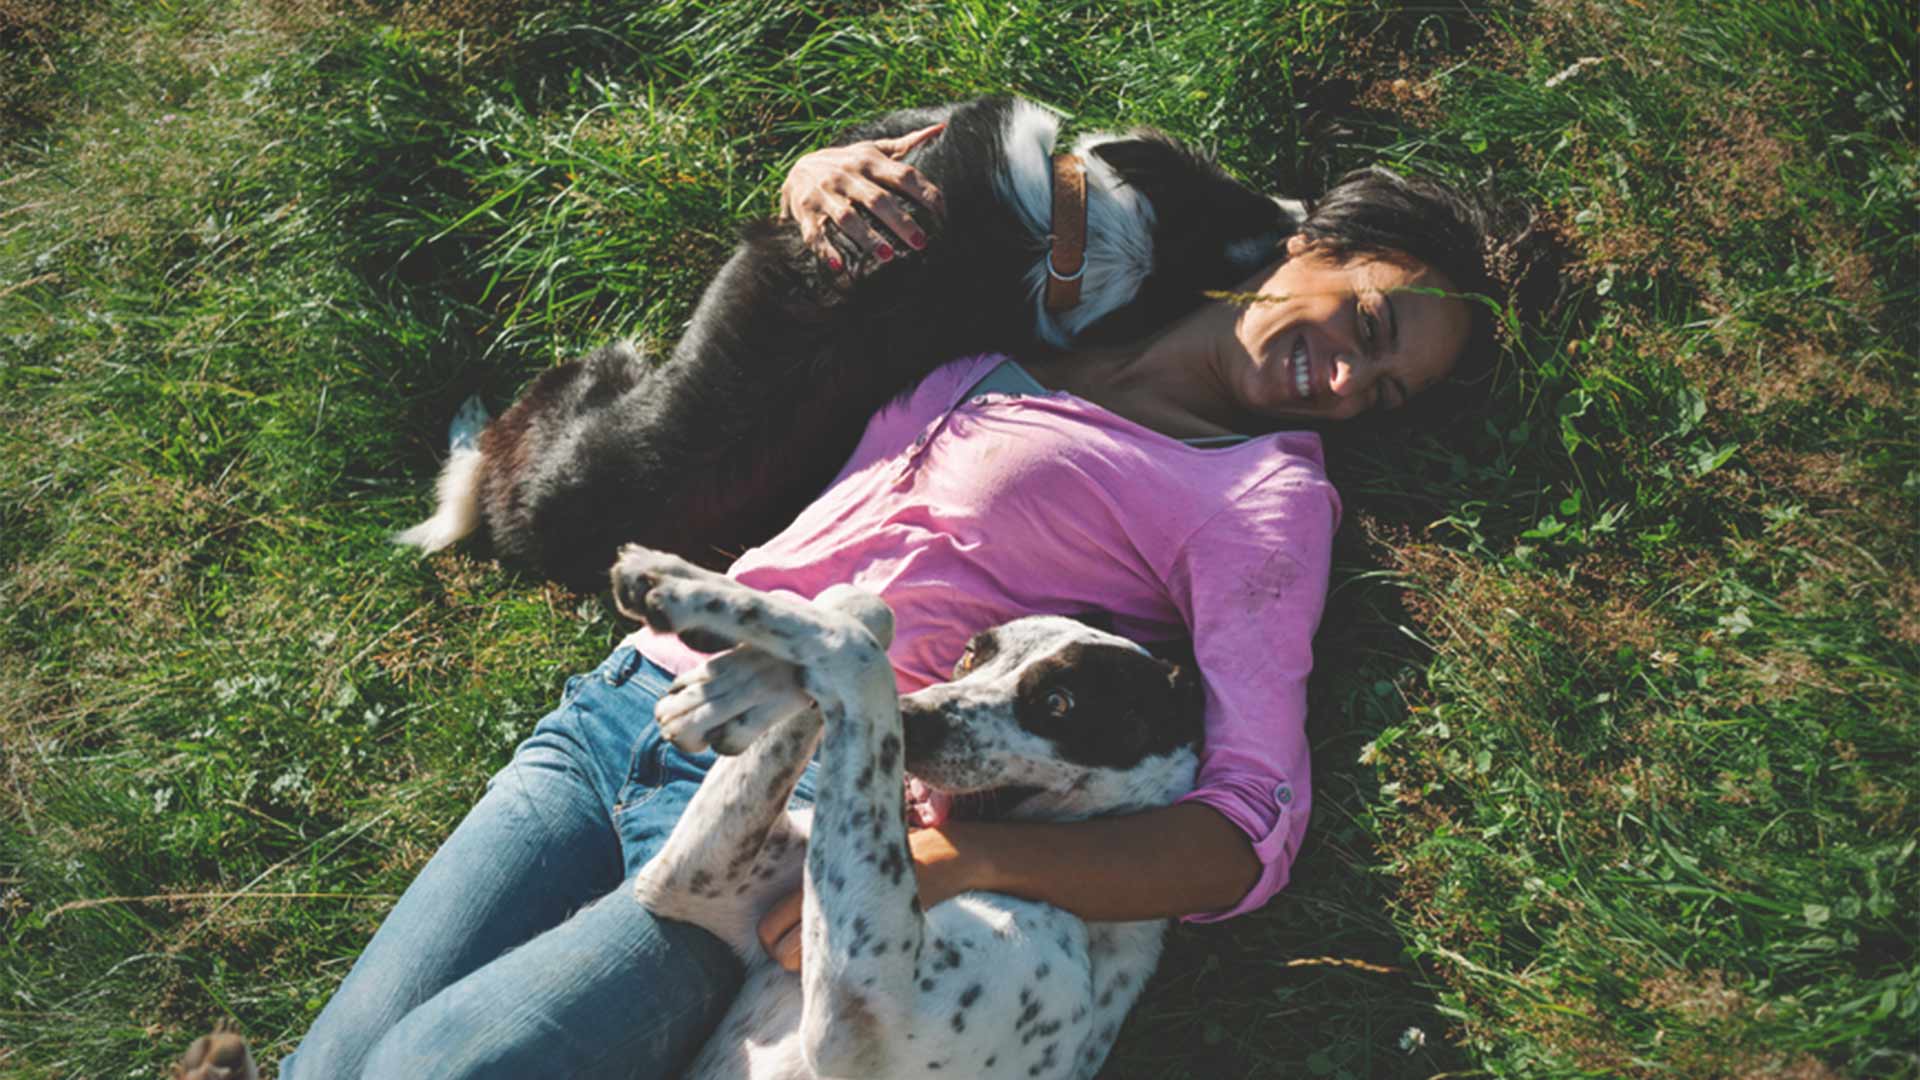 Woman Playing with Dogs in Grass | What We're Reading: The Importance of Play